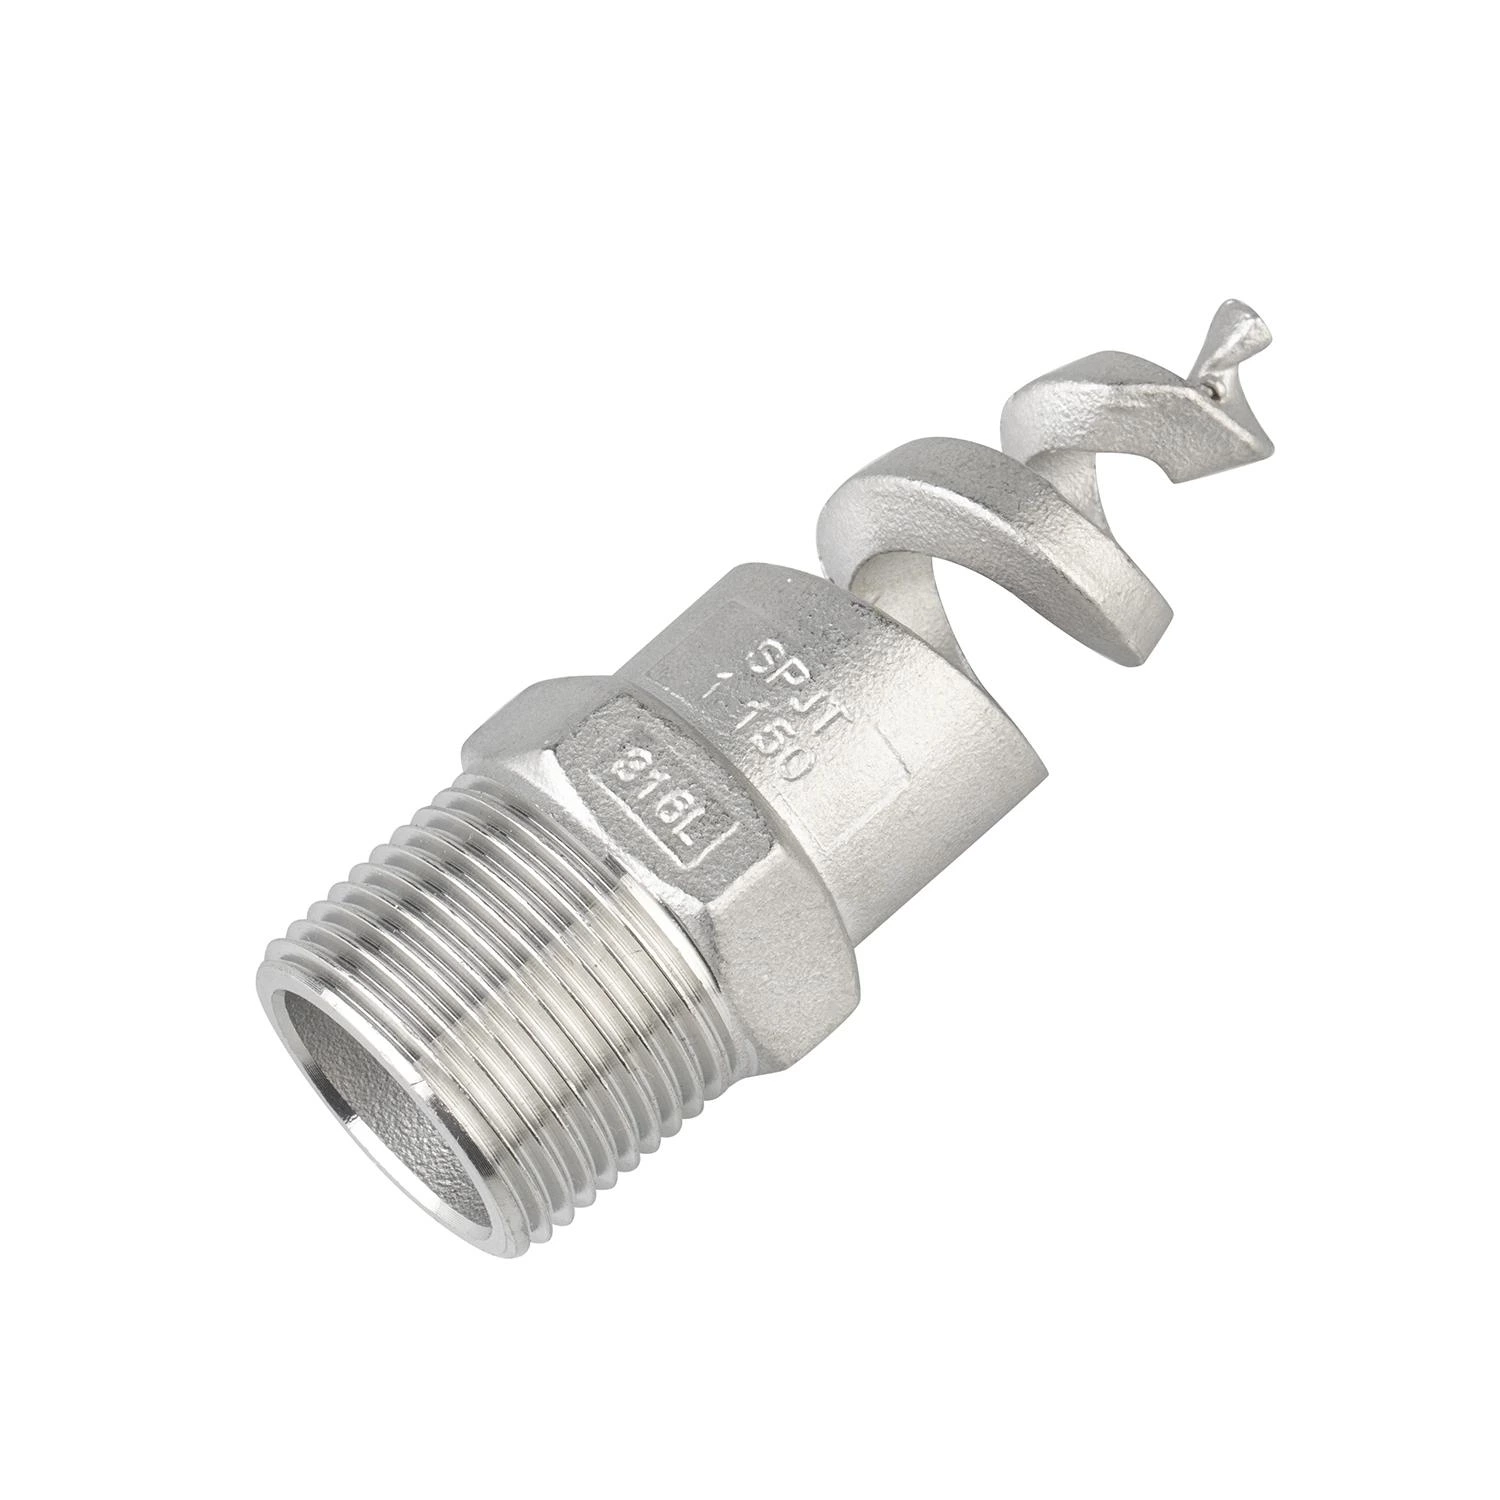 Stainless Steel Pipe Fitting Full Cone Male Threaded Water Spiral Nozzle